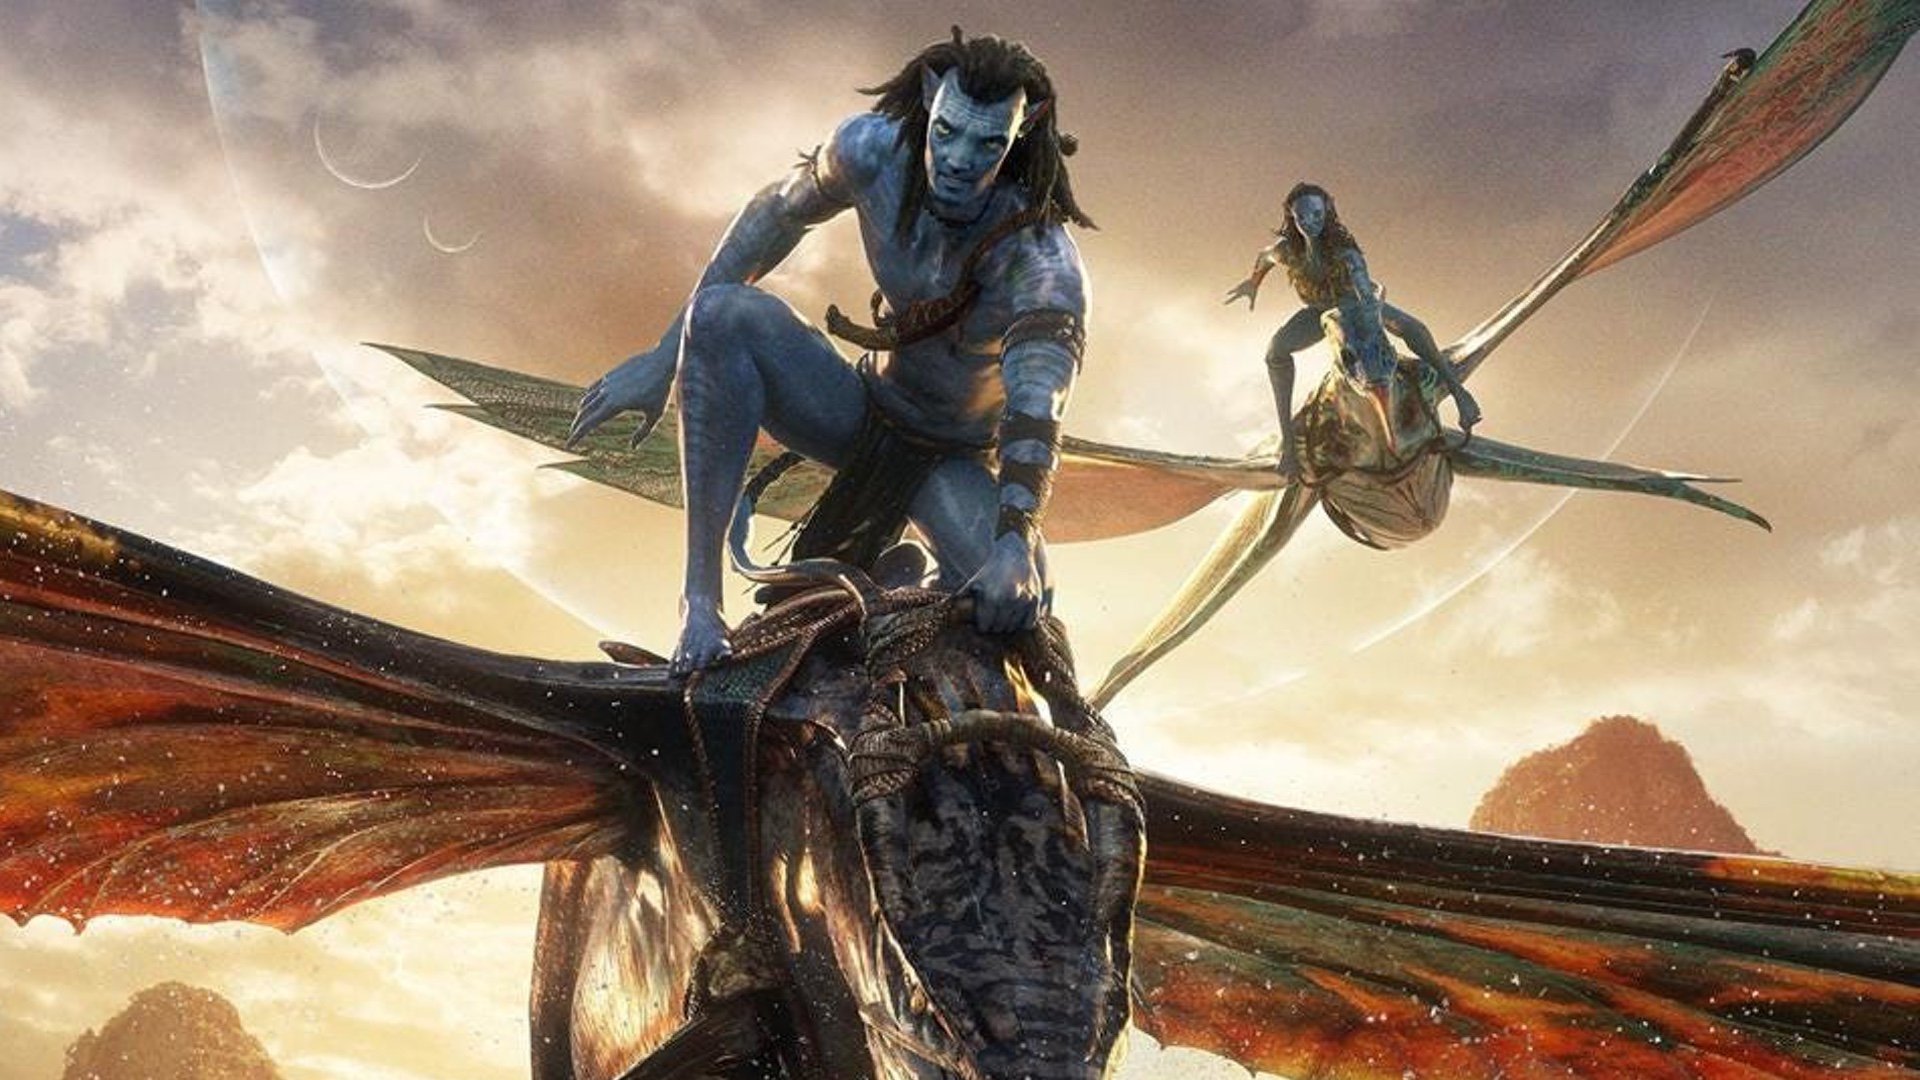 James Cameron Will Stop Making Avatar Movies If Sequel Flops